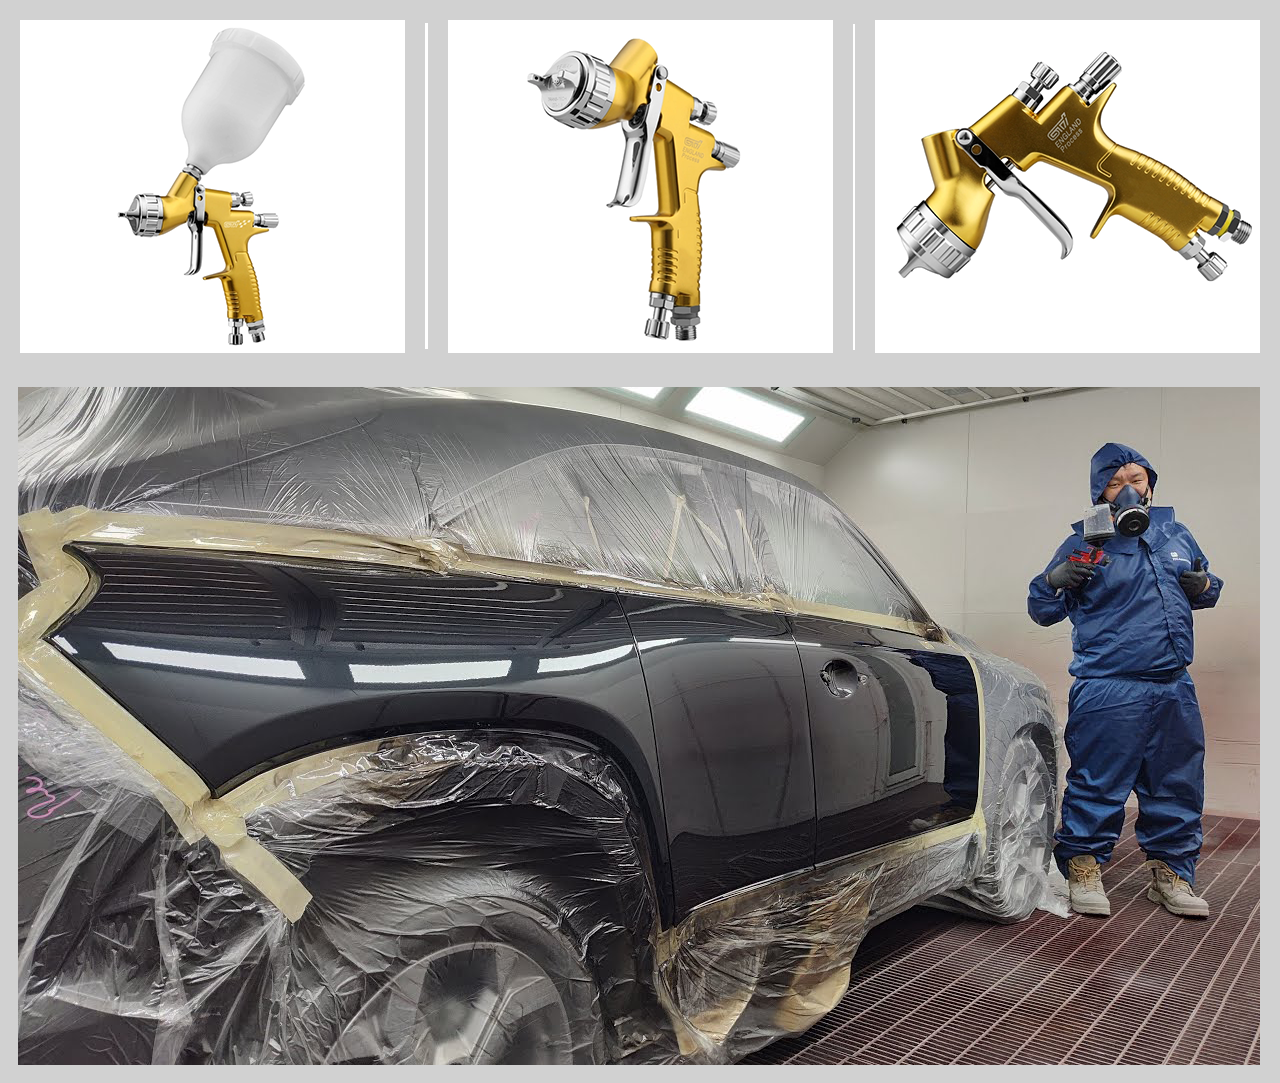 South Africa’s largest second-hand car dealer uses SPURUI automotive spray guns to refurbish vehicles